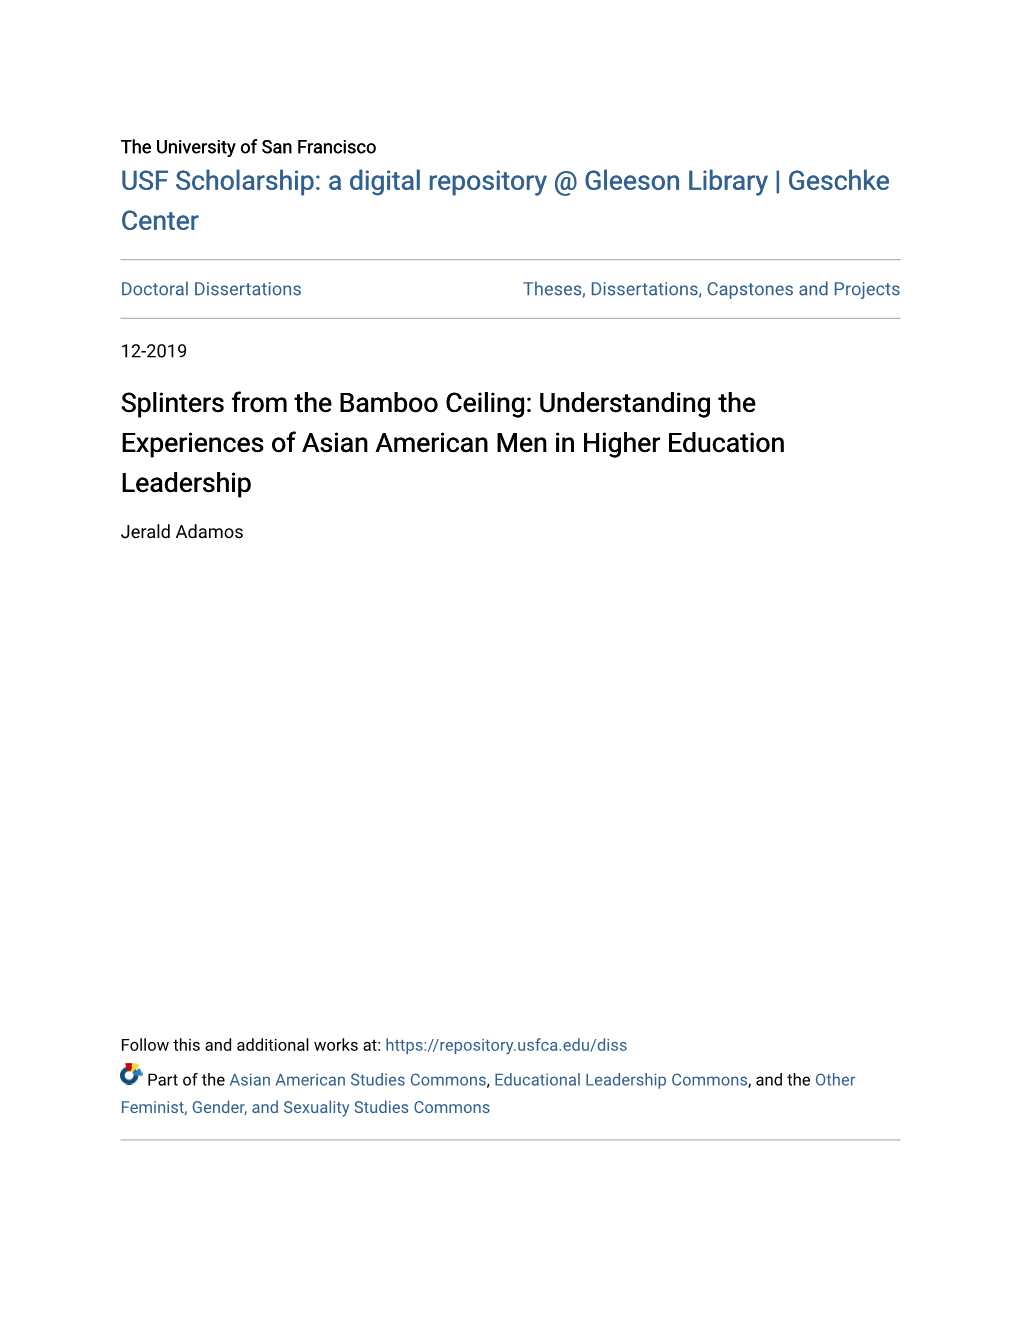 Splinters from the Bamboo Ceiling: Understanding the Experiences of Asian American Men in Higher Education Leadership